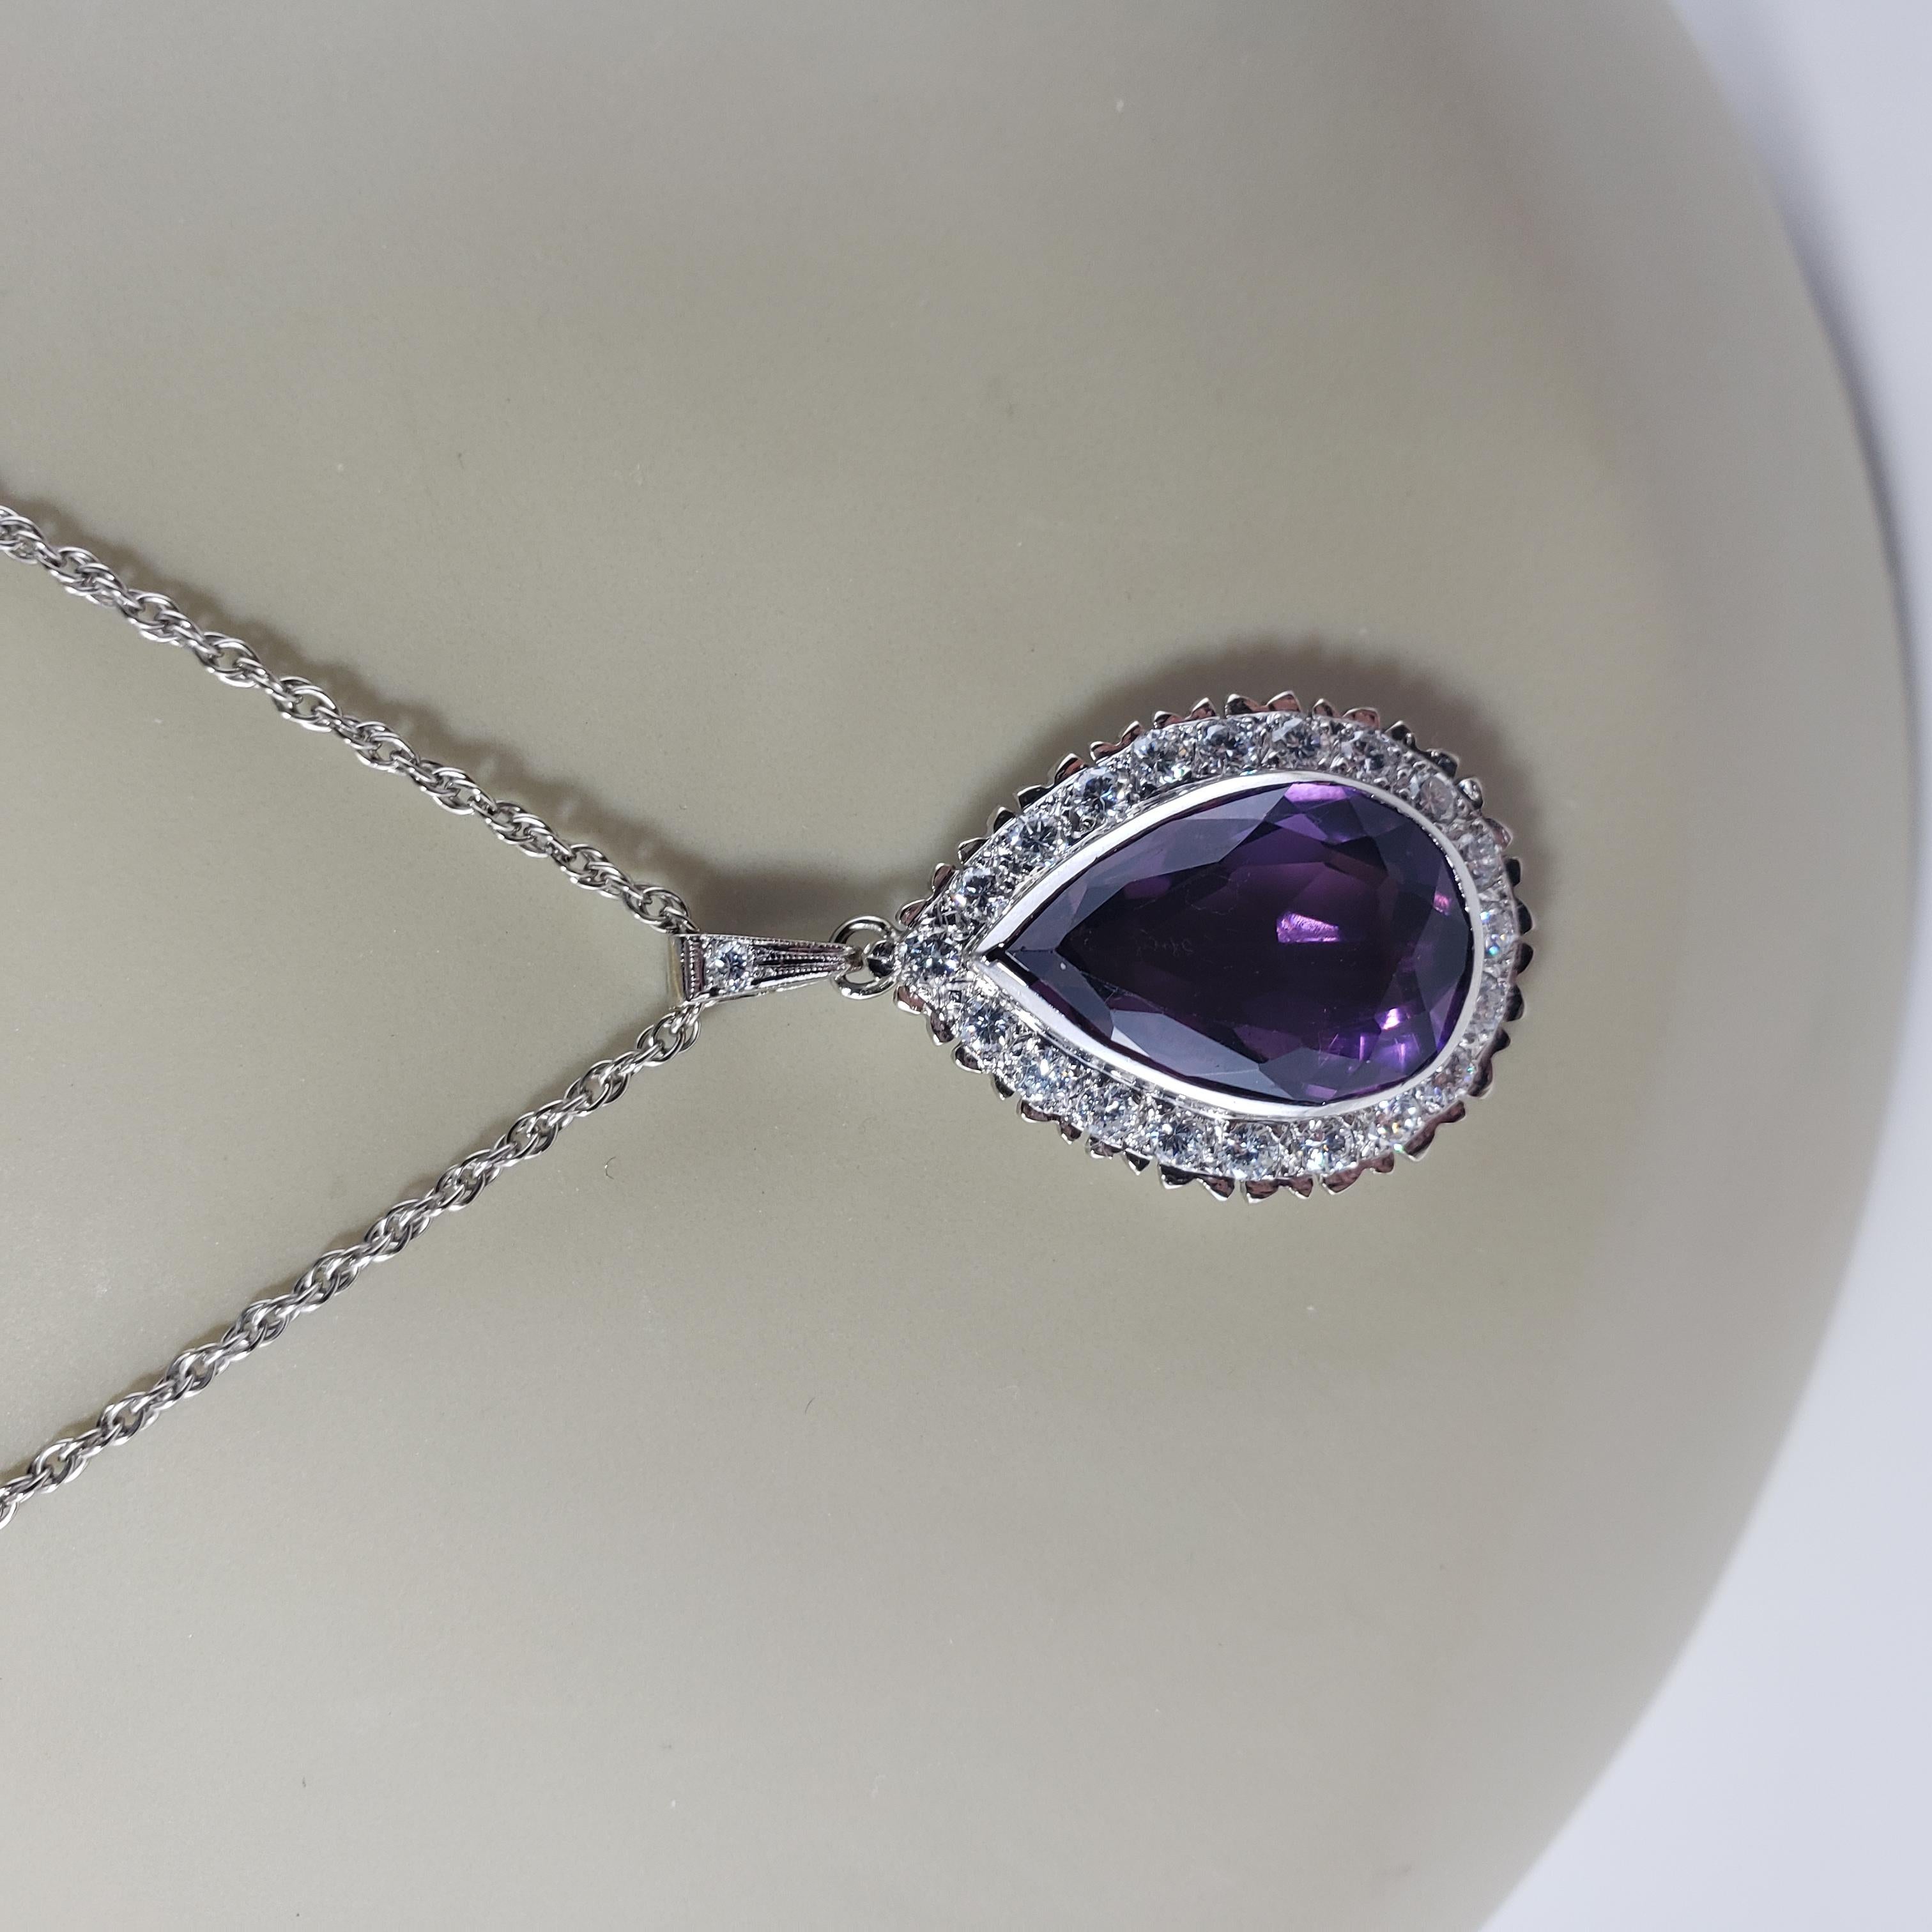 14 Karat White Gold Amethyst and Diamond Pendant Necklace #13737 For Sale 4